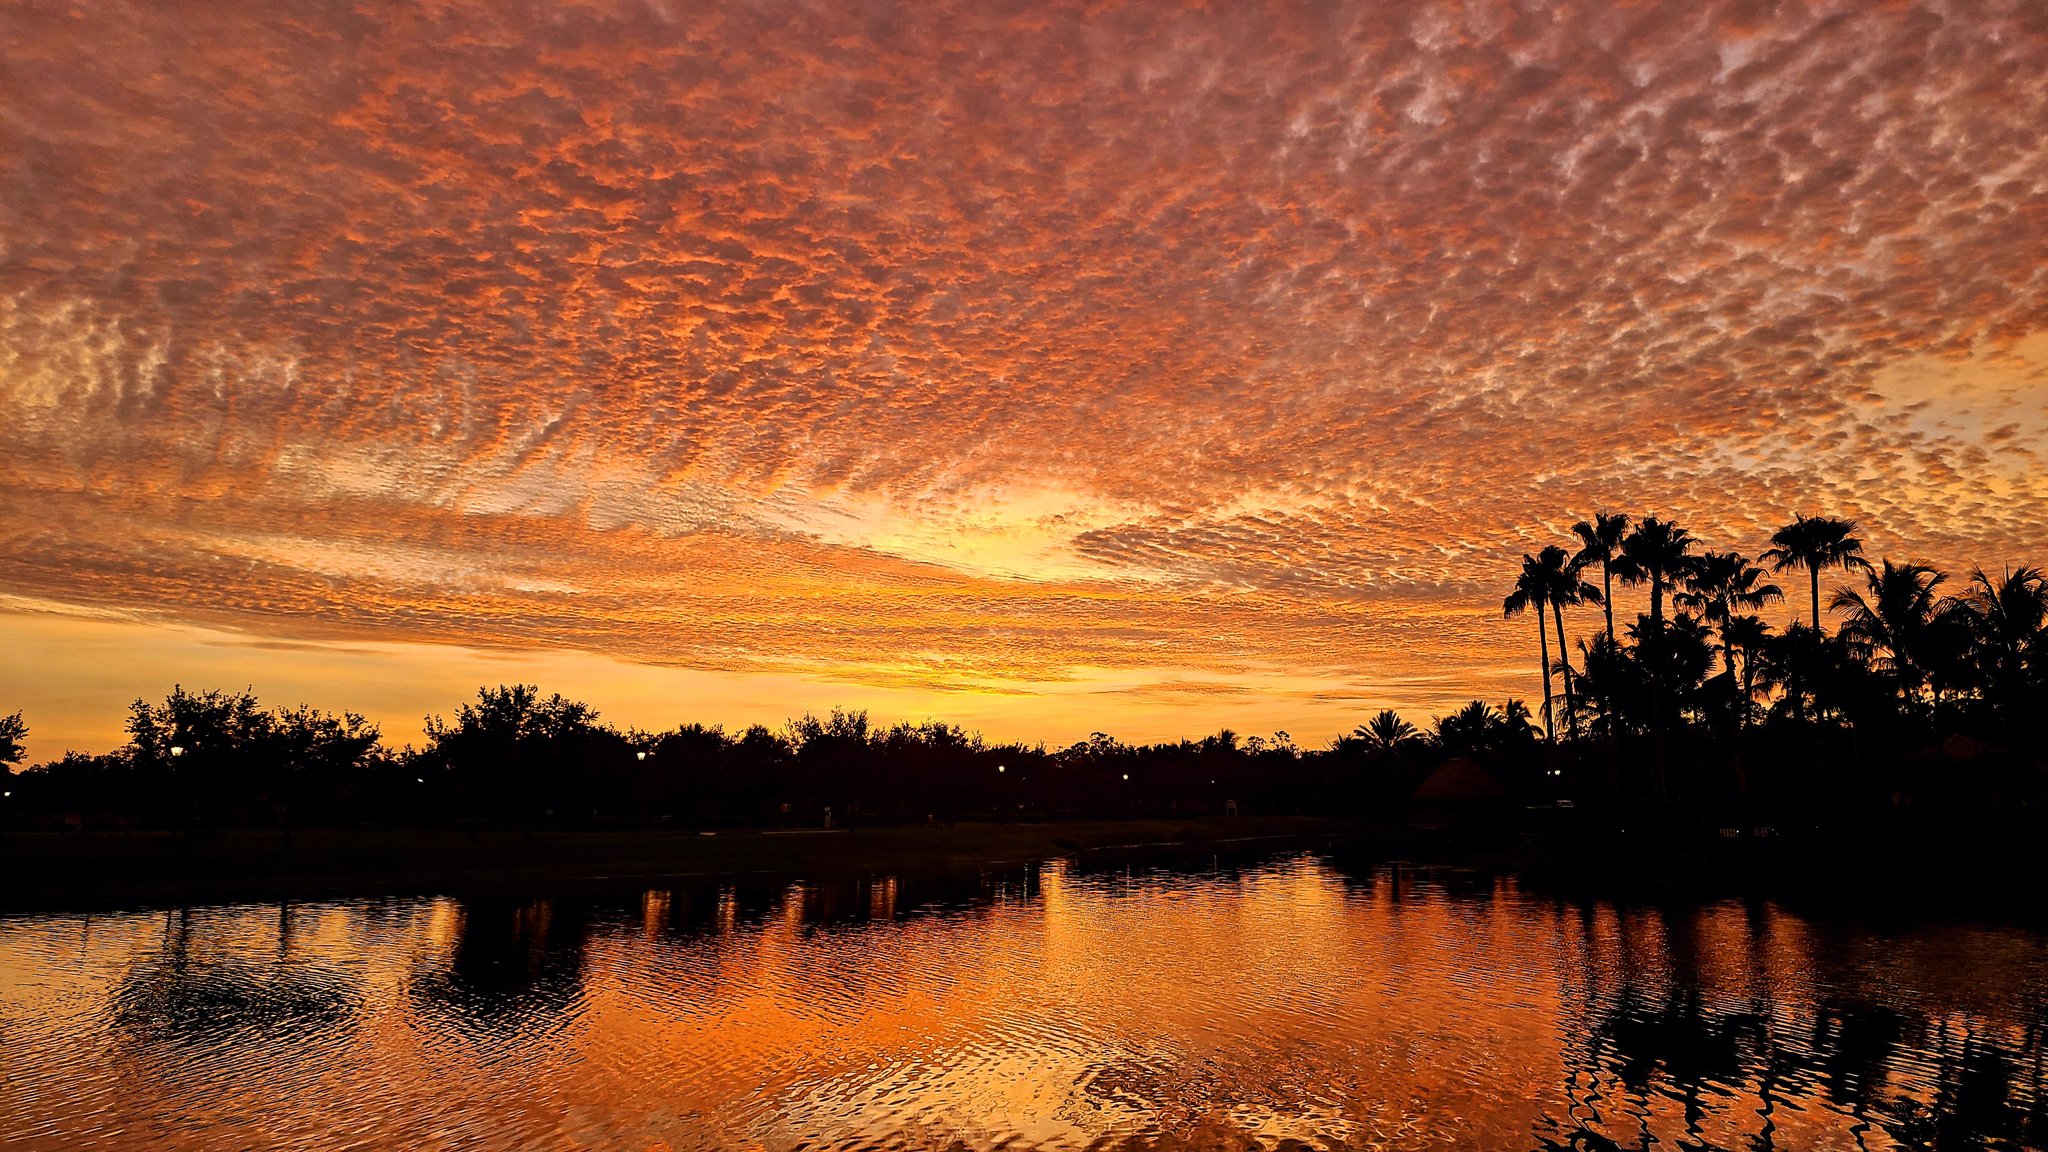 1st Place South Florida Fort Myers sunset by Jim Wilkins @onebuck66